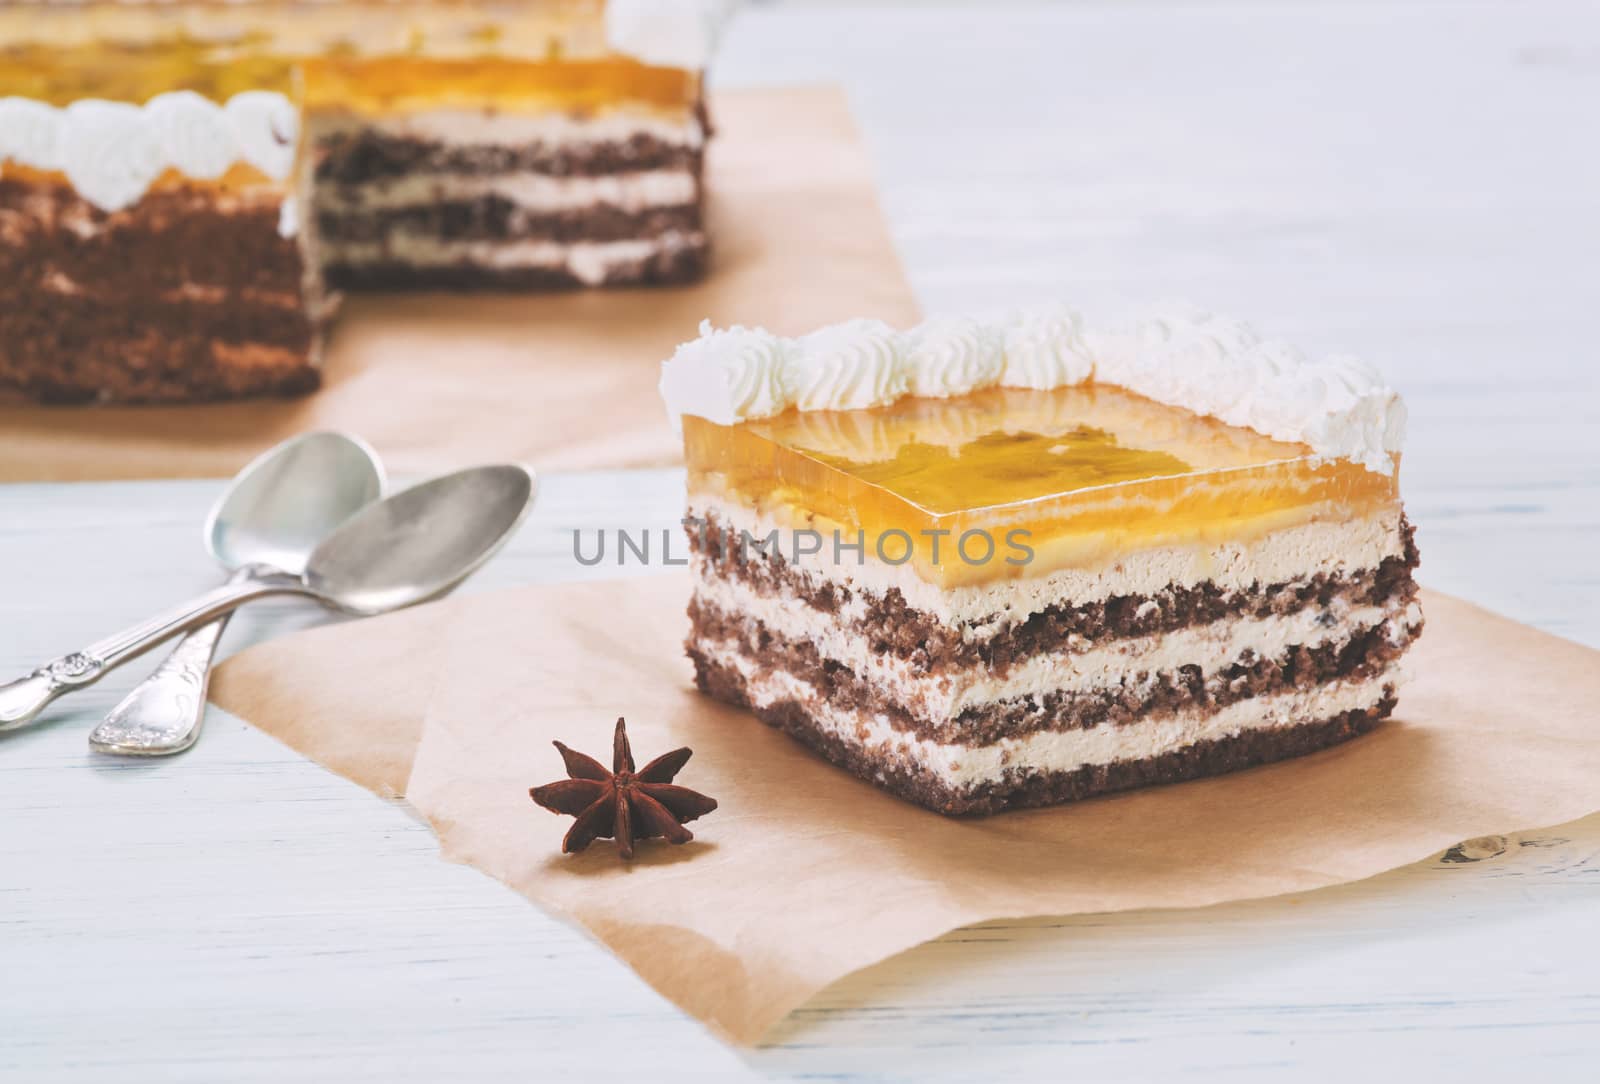 Banana cake with jelly on baking paper by kzen